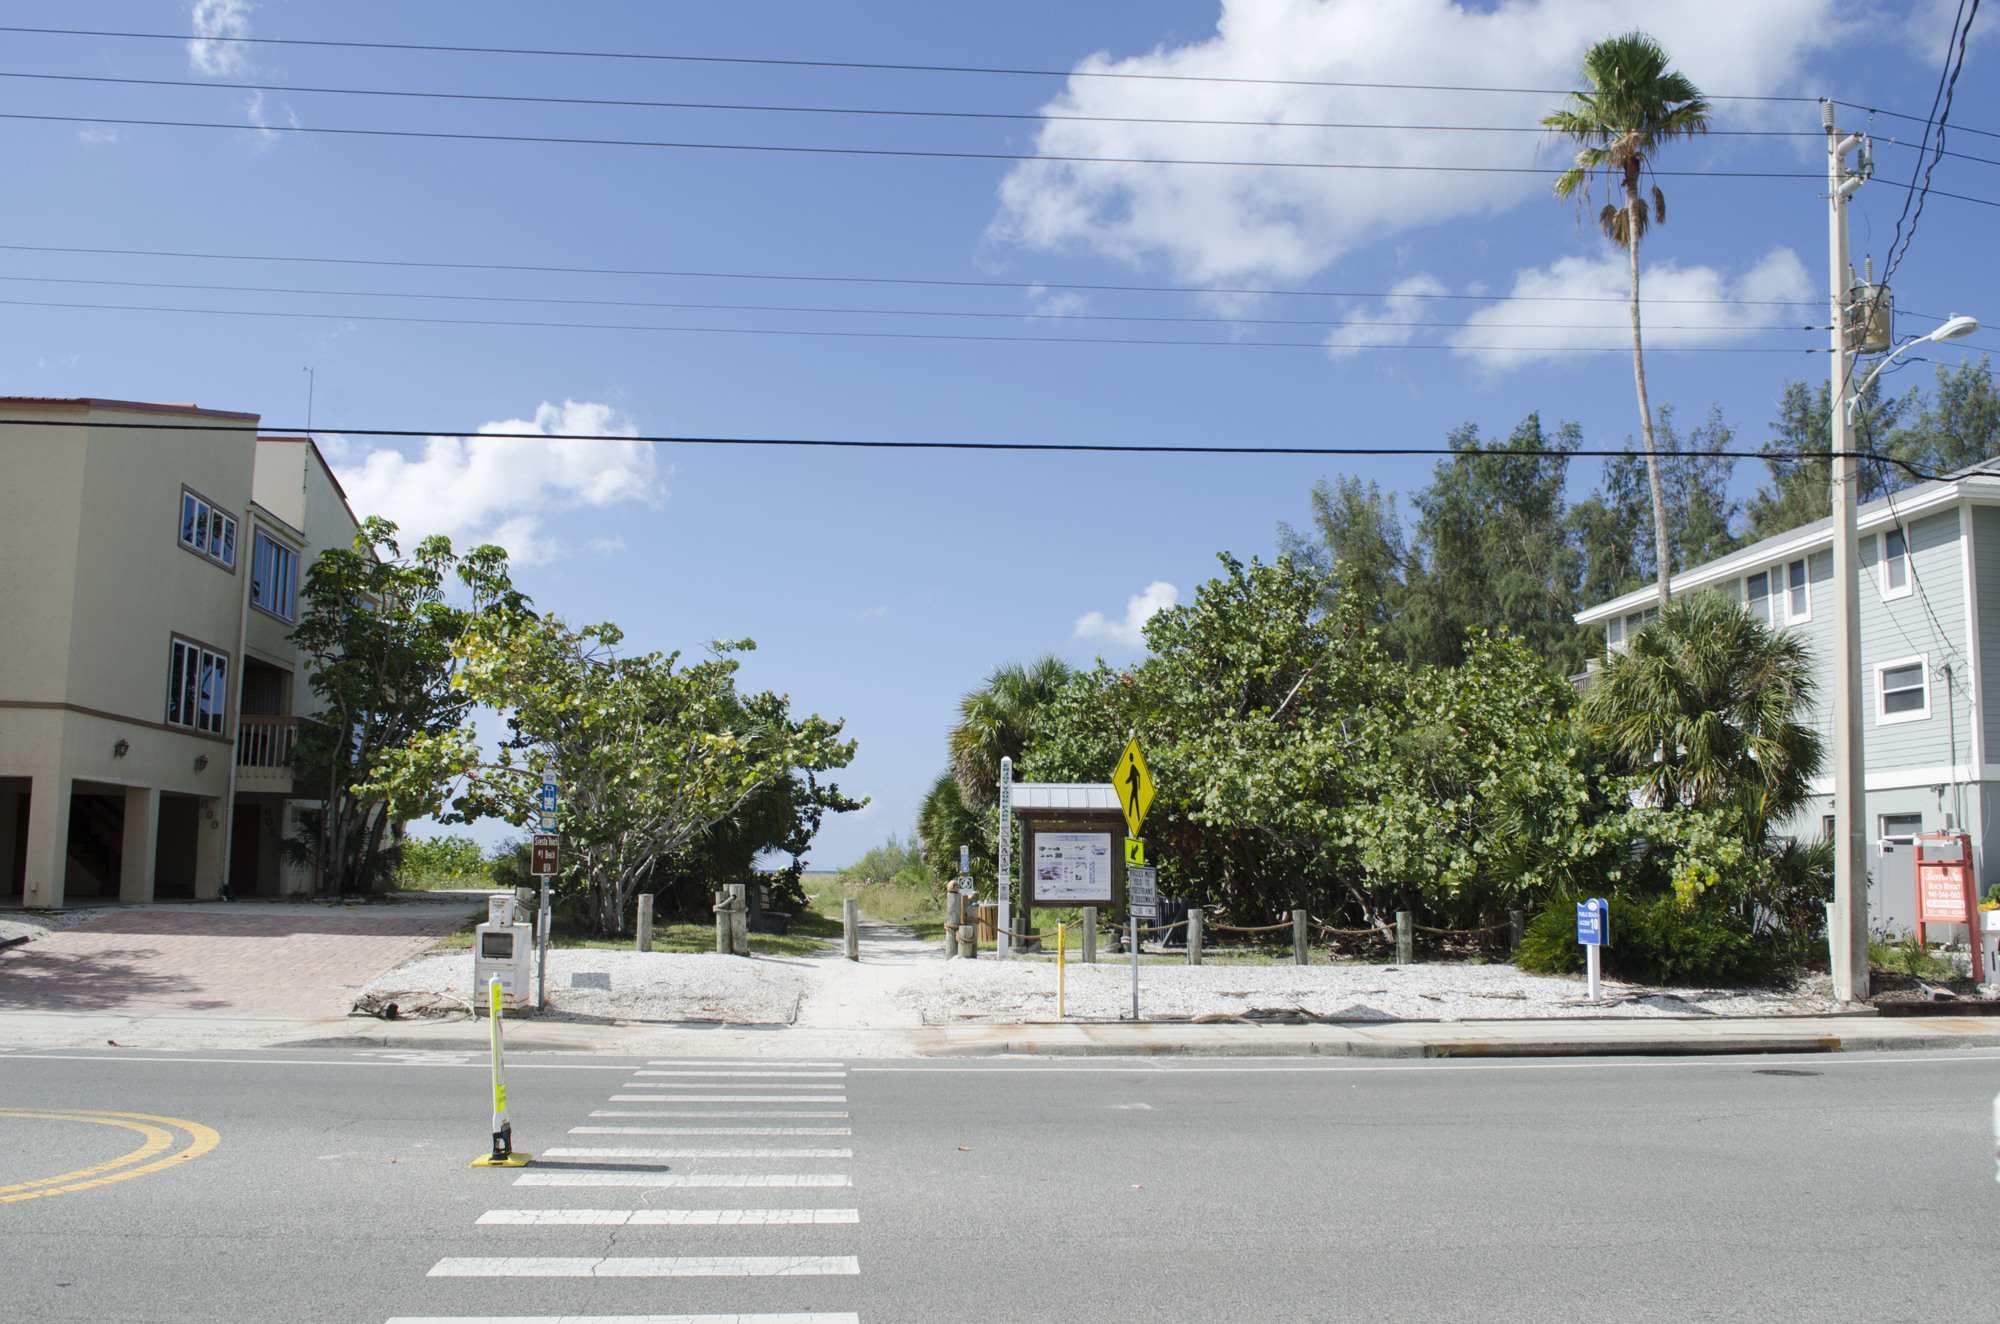 The view of beach access 10 from the street. At this time, cars can't drive onto the access. 